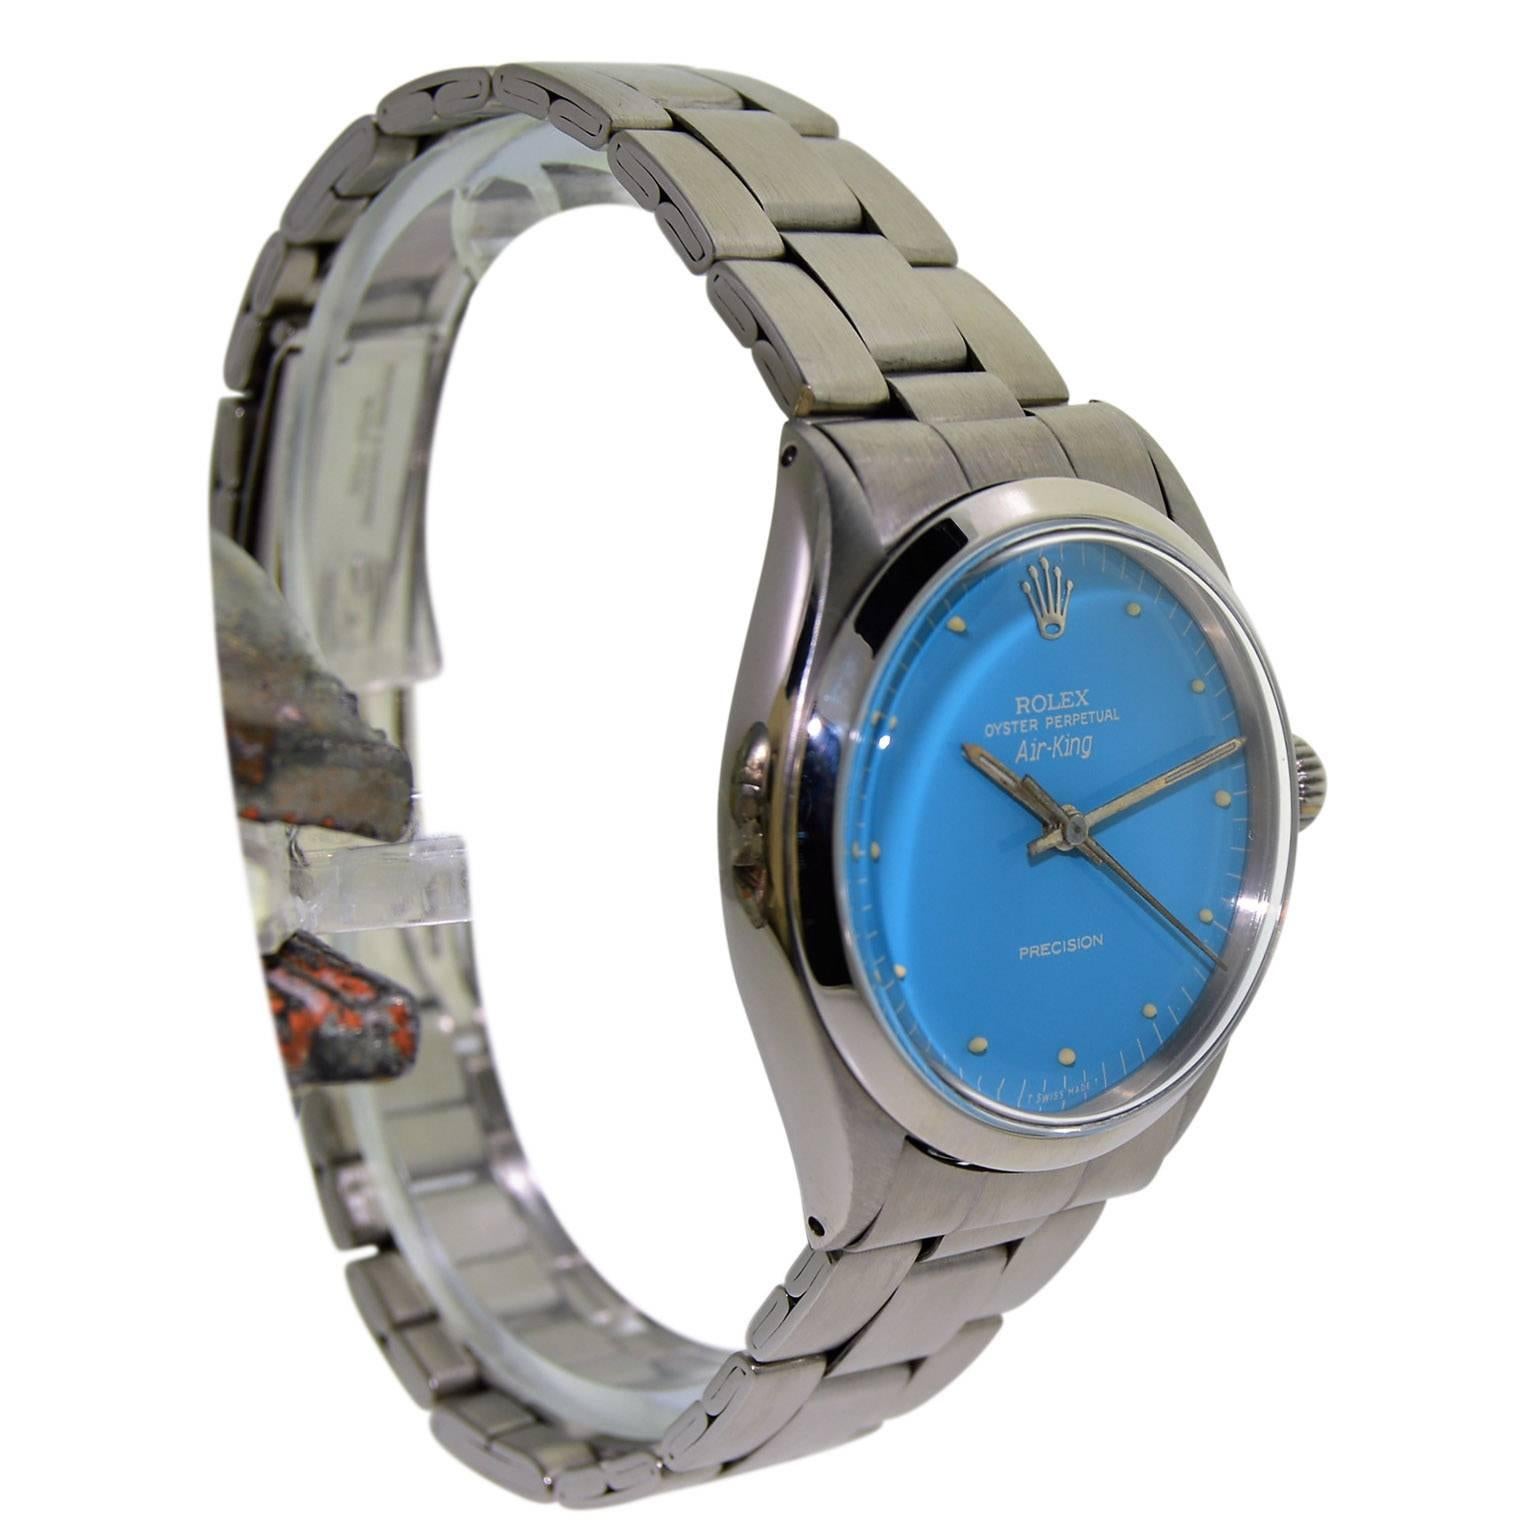 Women's or Men's Rolex Stainless Steel Air King Powder Blue Dial Perpetual Wind Wristwatch